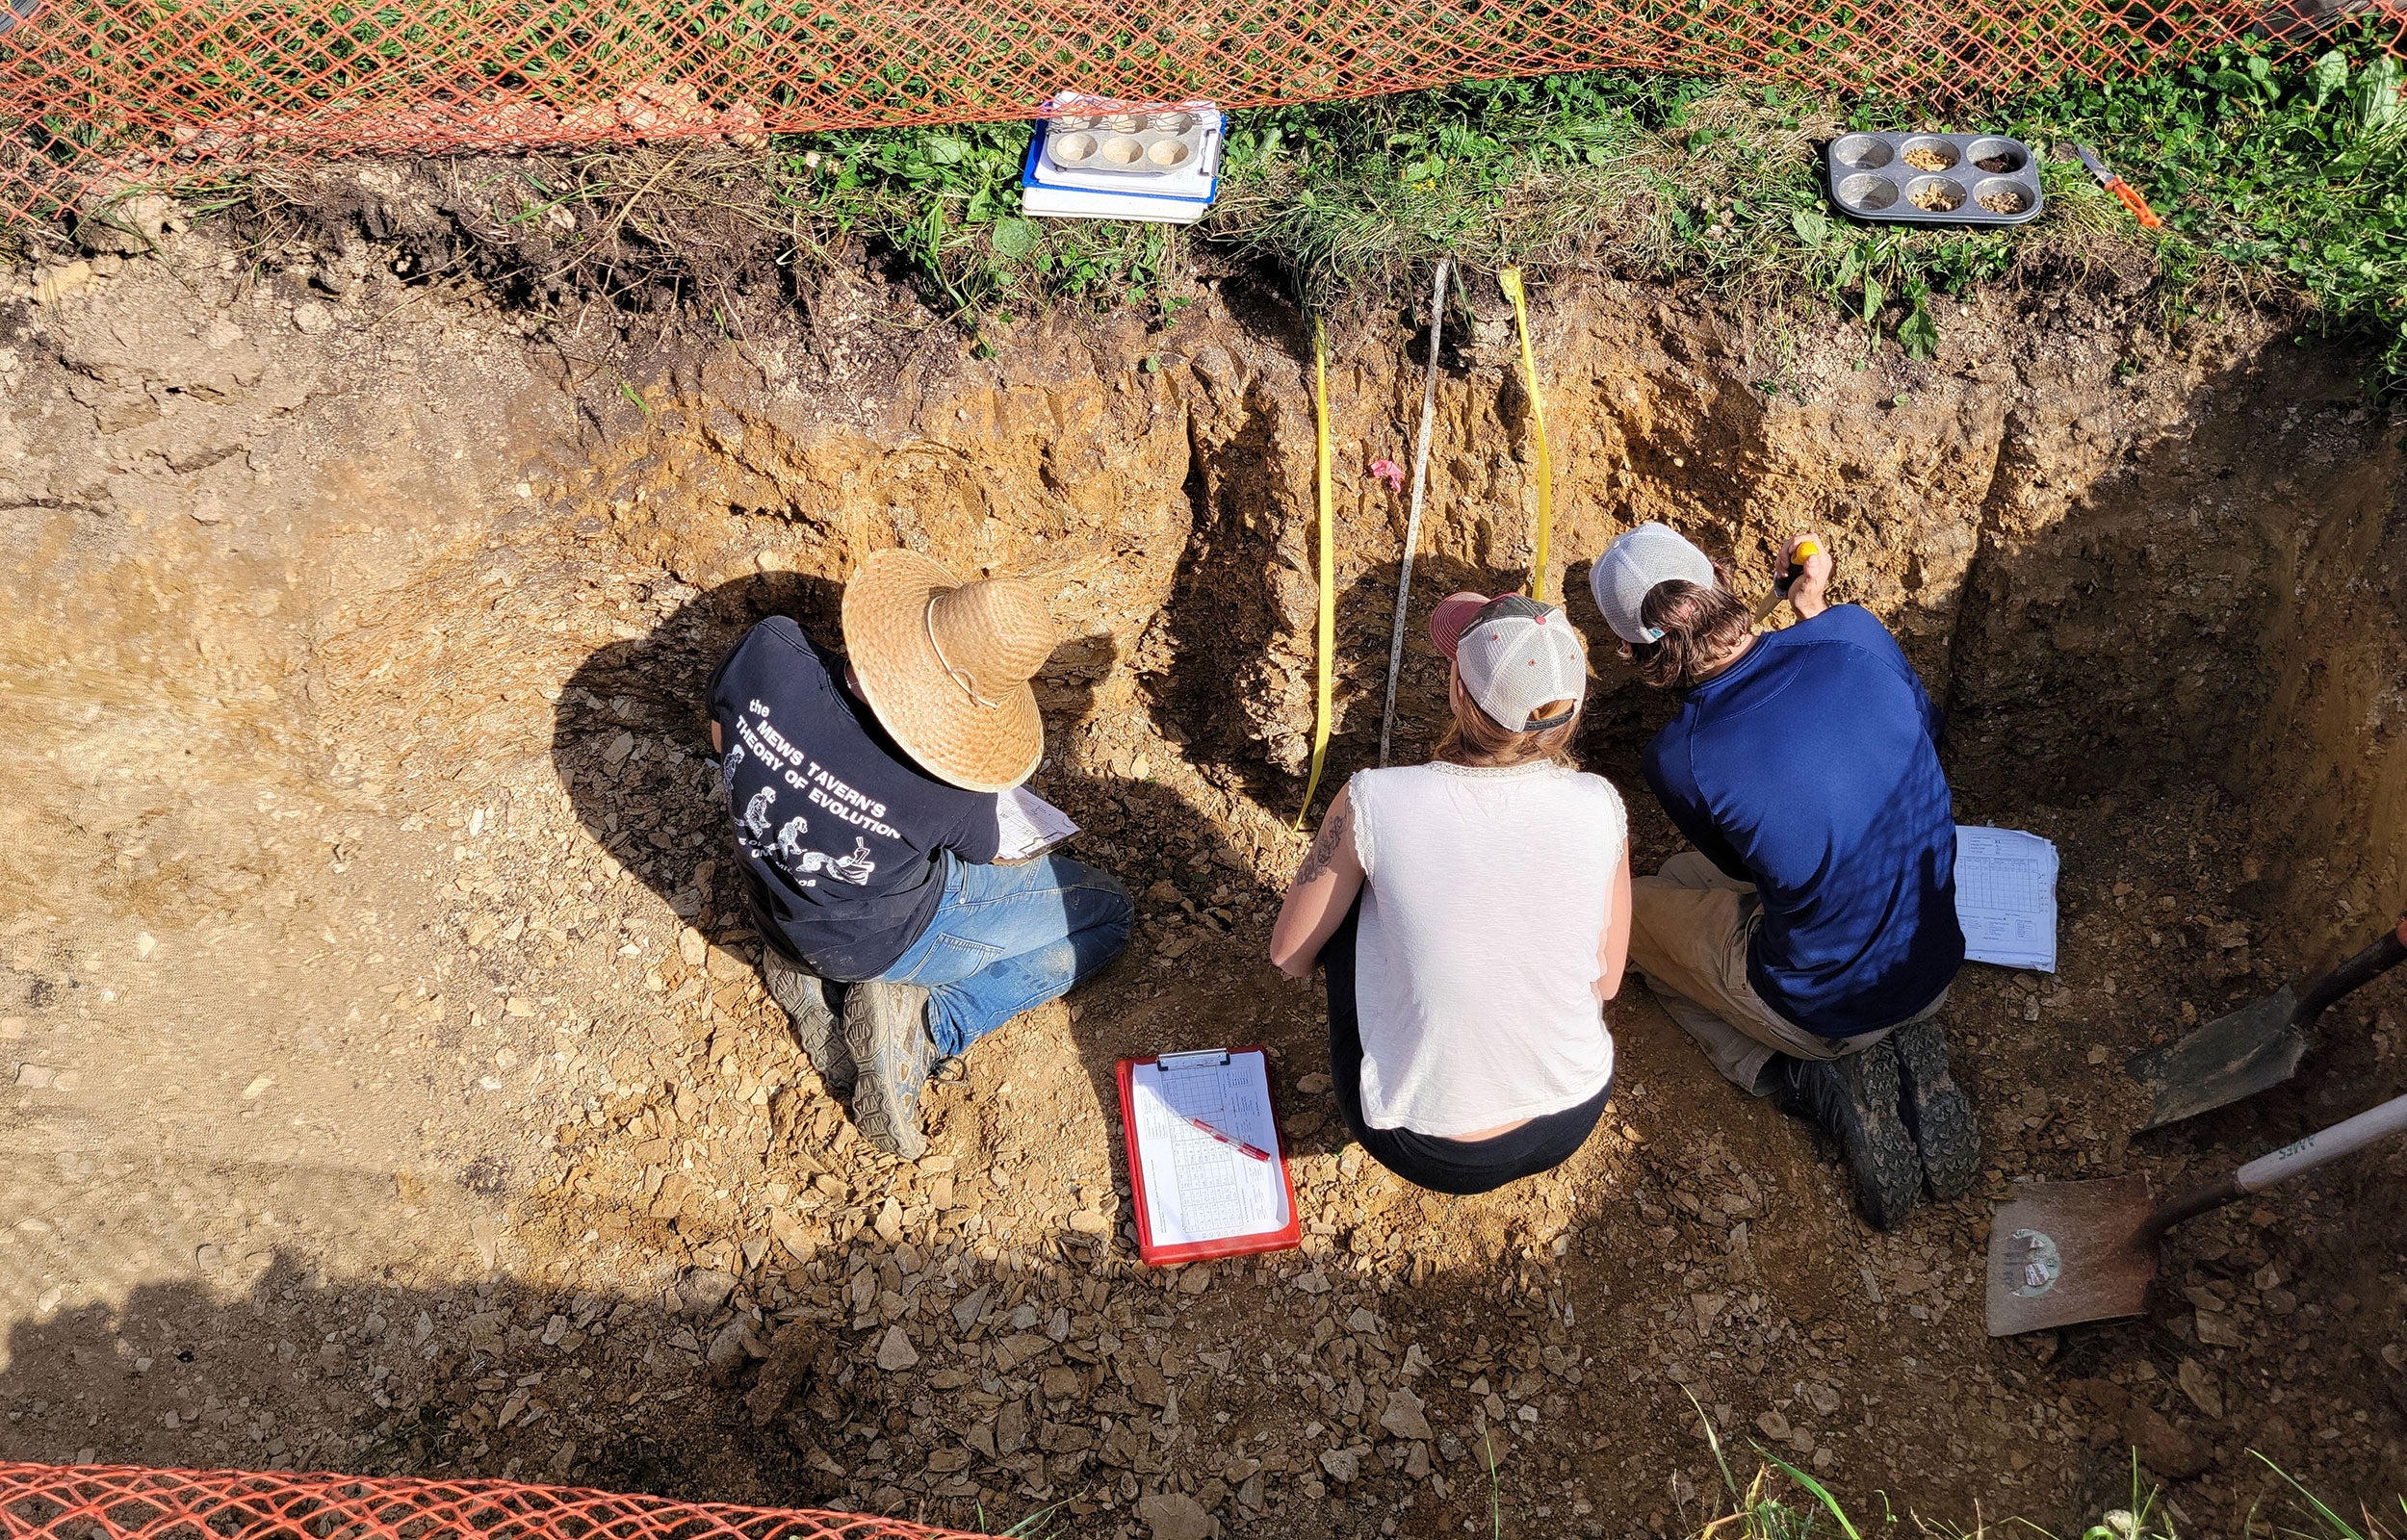 URI students at soil judging competition